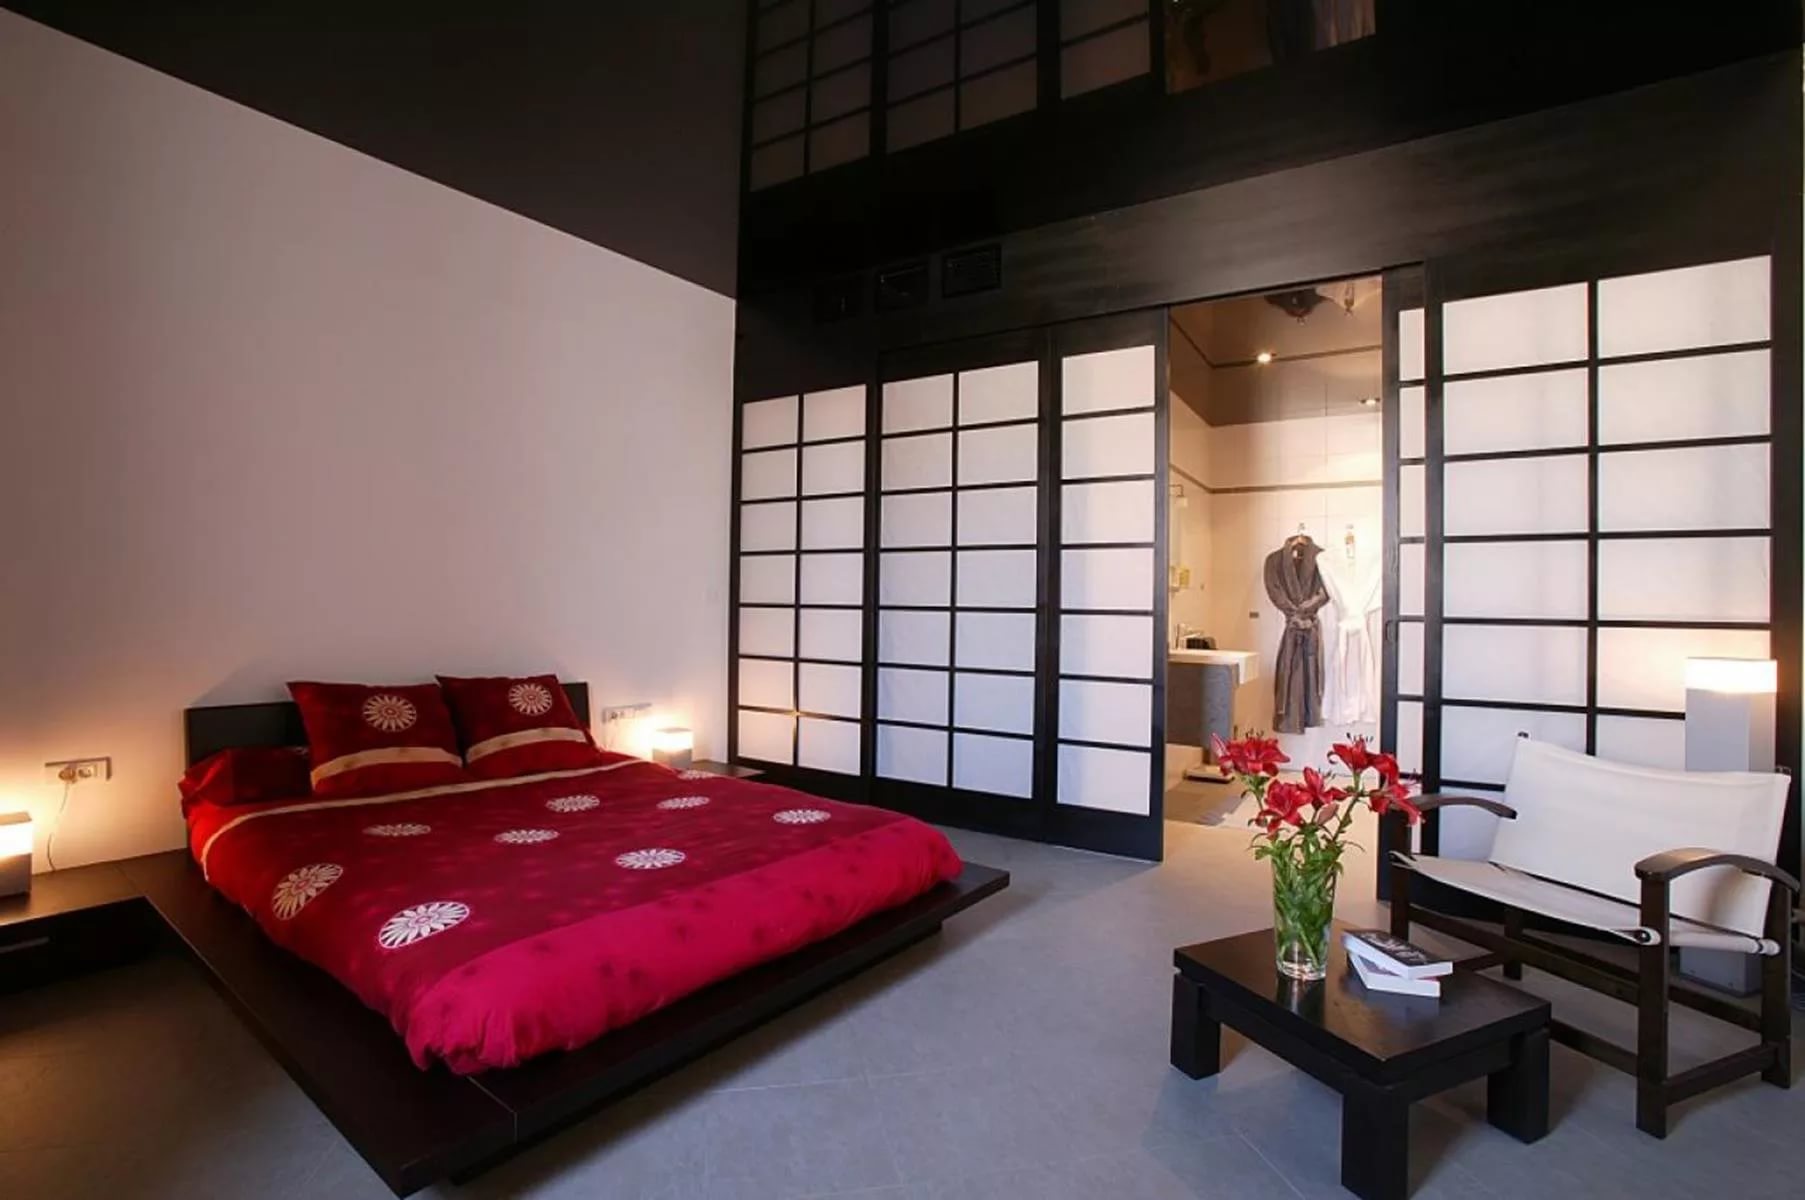 interior of the bedroom by feng shui decor photo